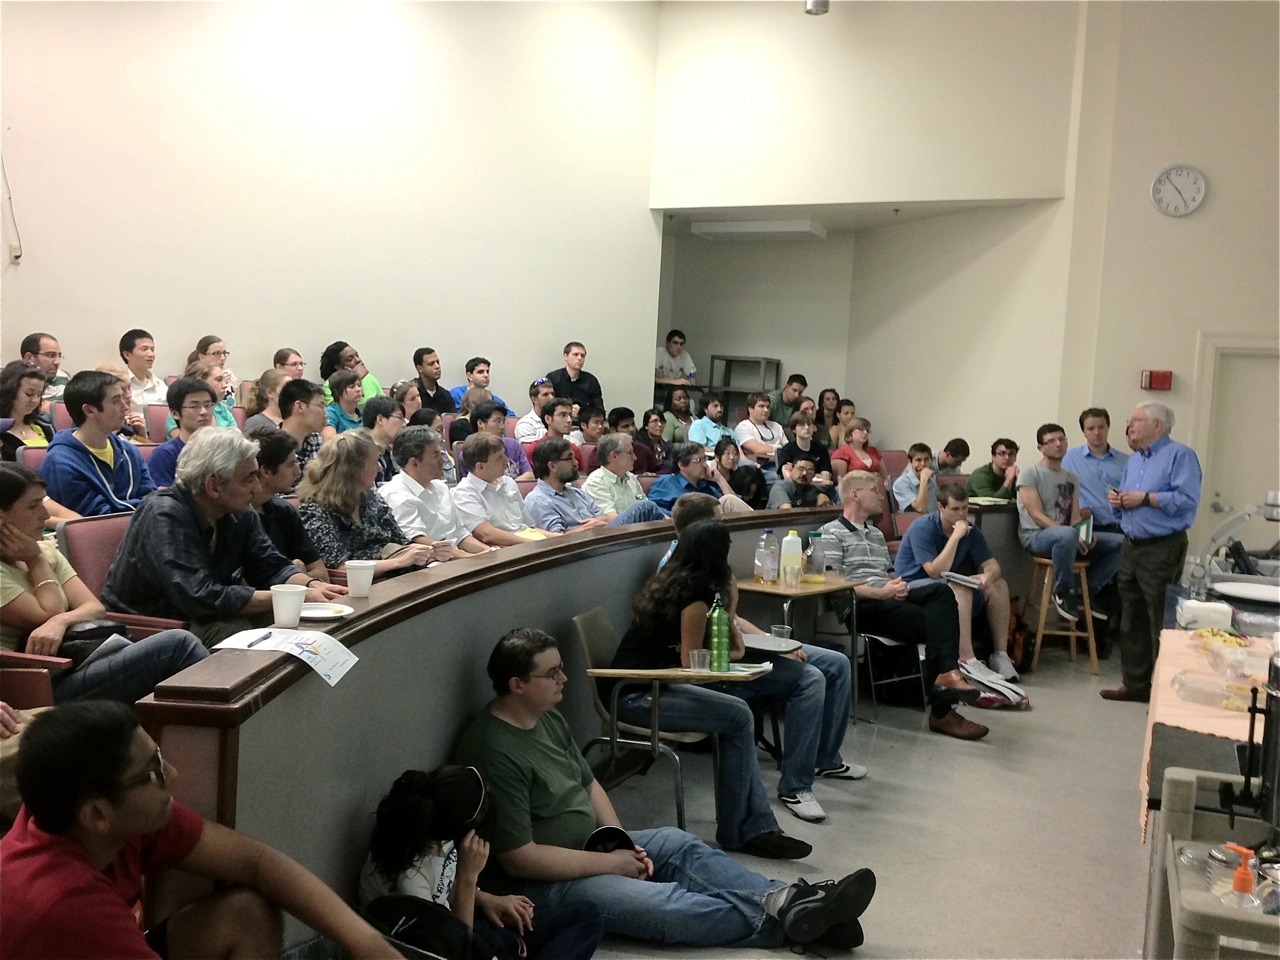 4/9/12 Spiess Lecture